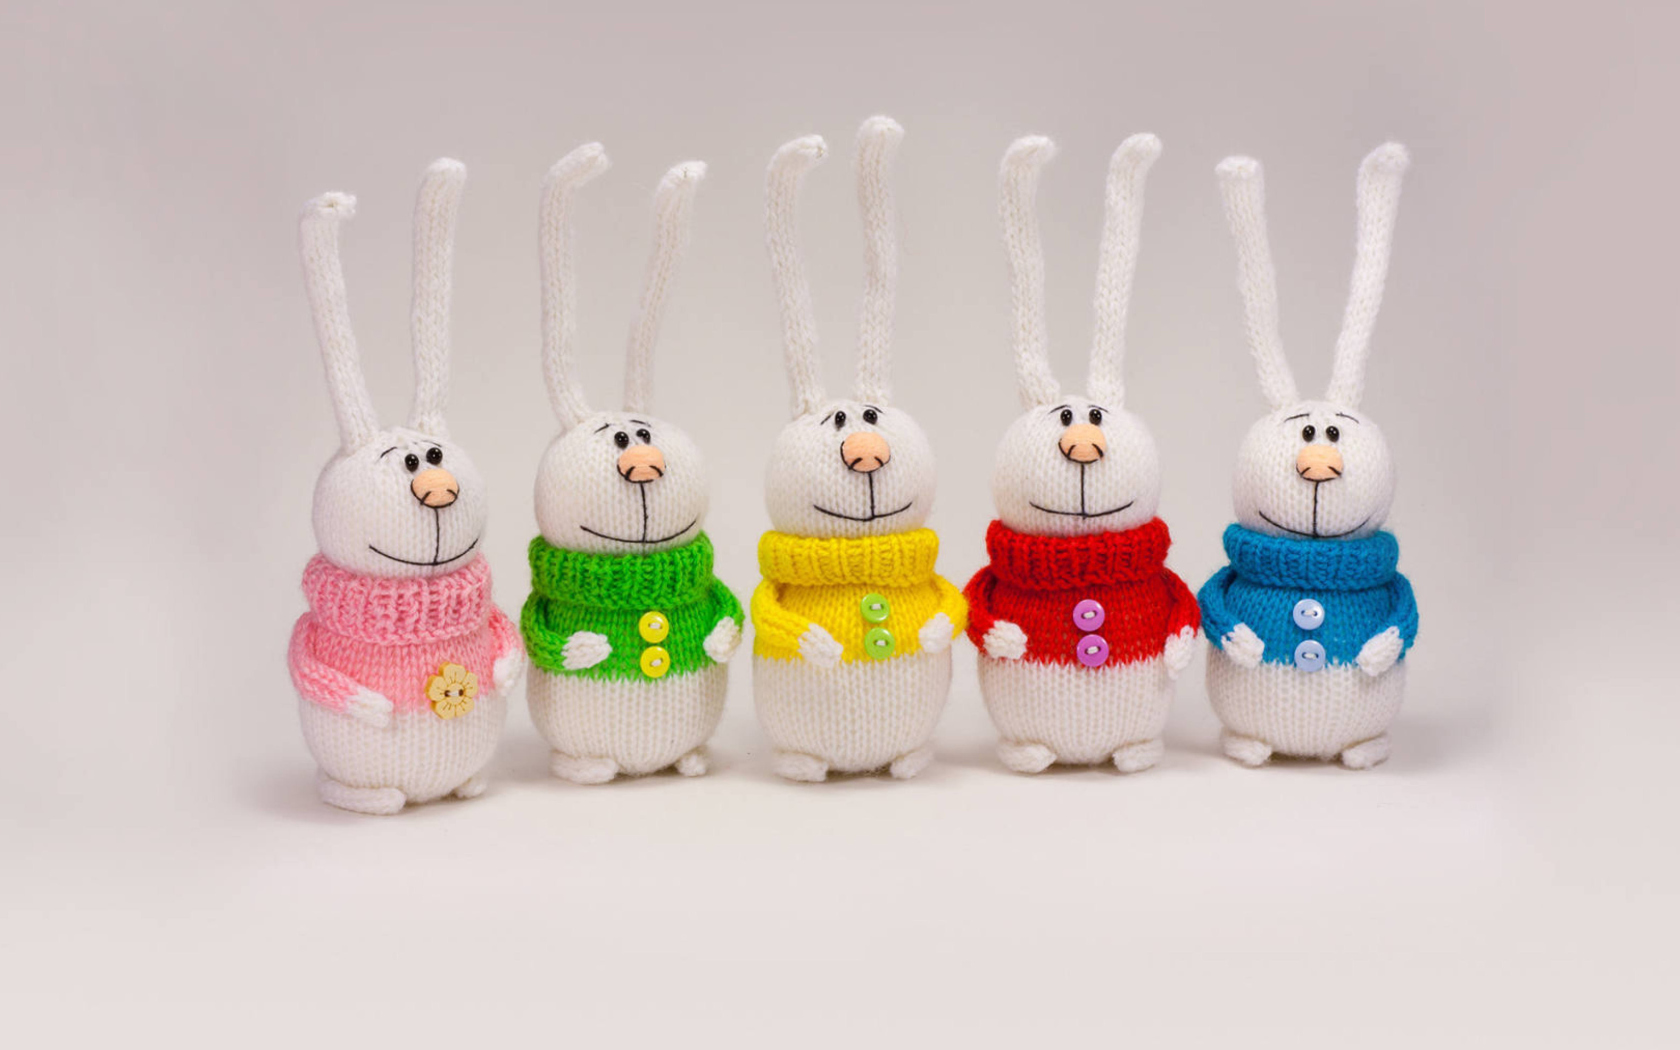 Knitted Bunnies In Colorful Sweaters screenshot #1 1680x1050